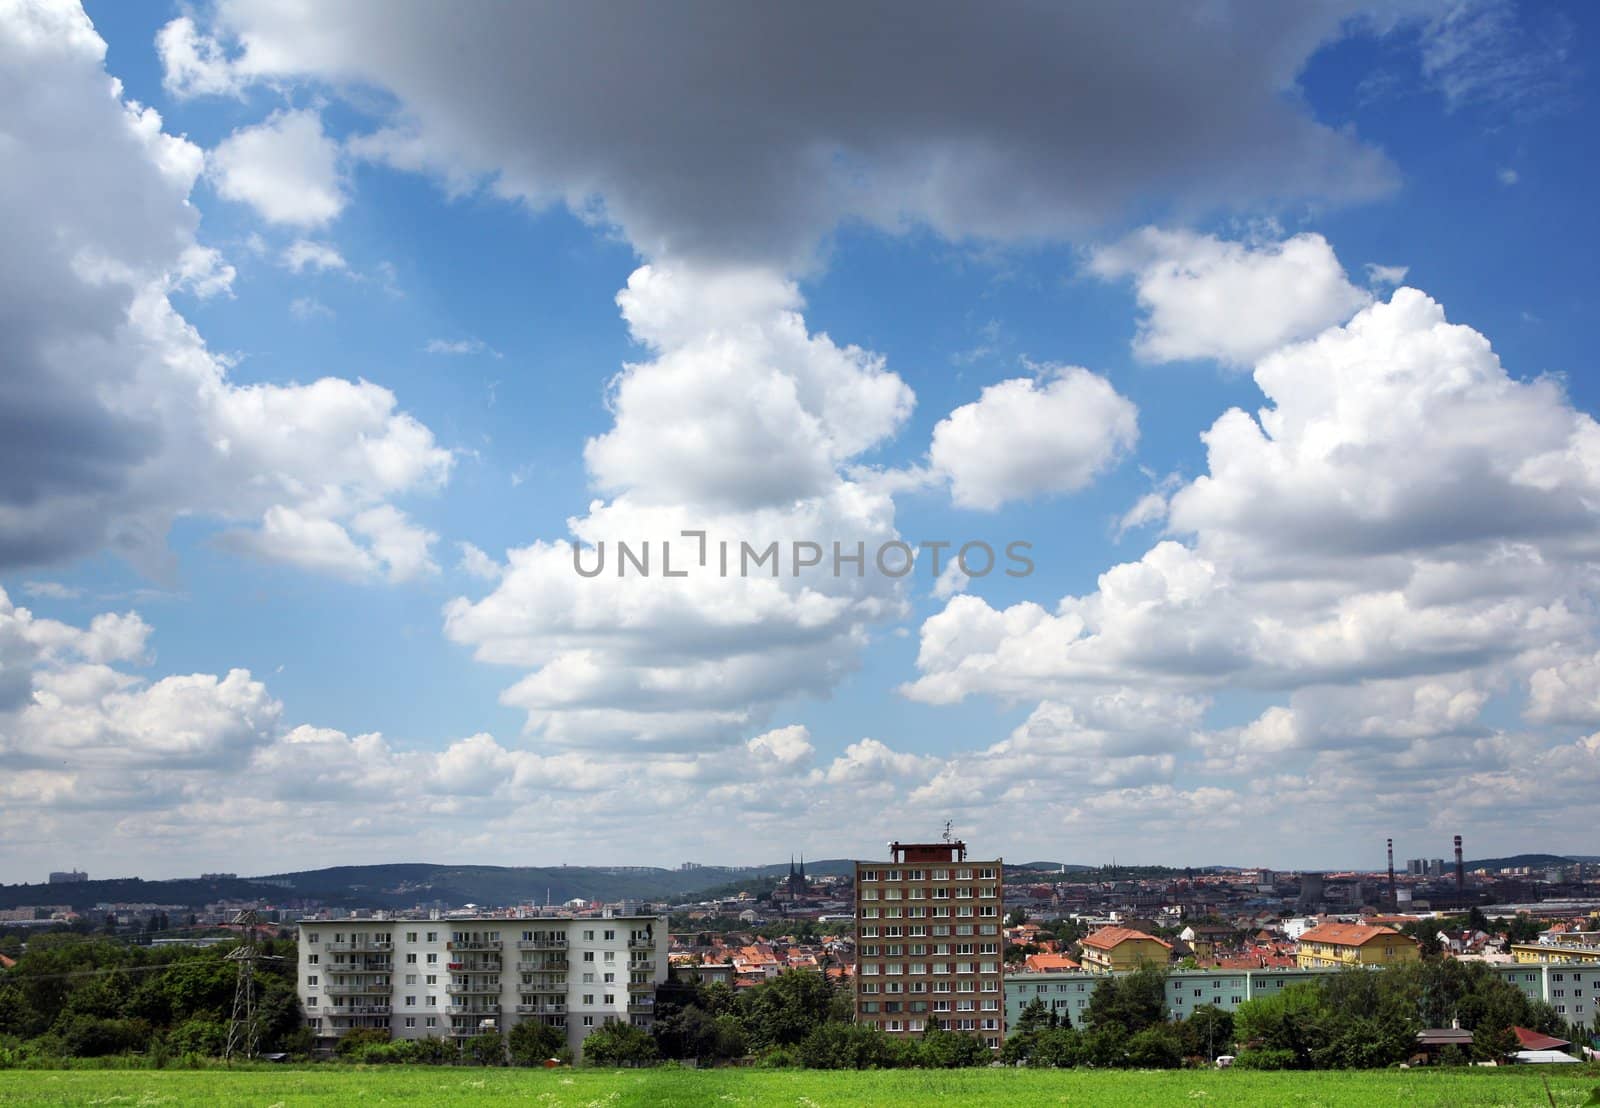 Landscape with city and dramatic cloudy sky